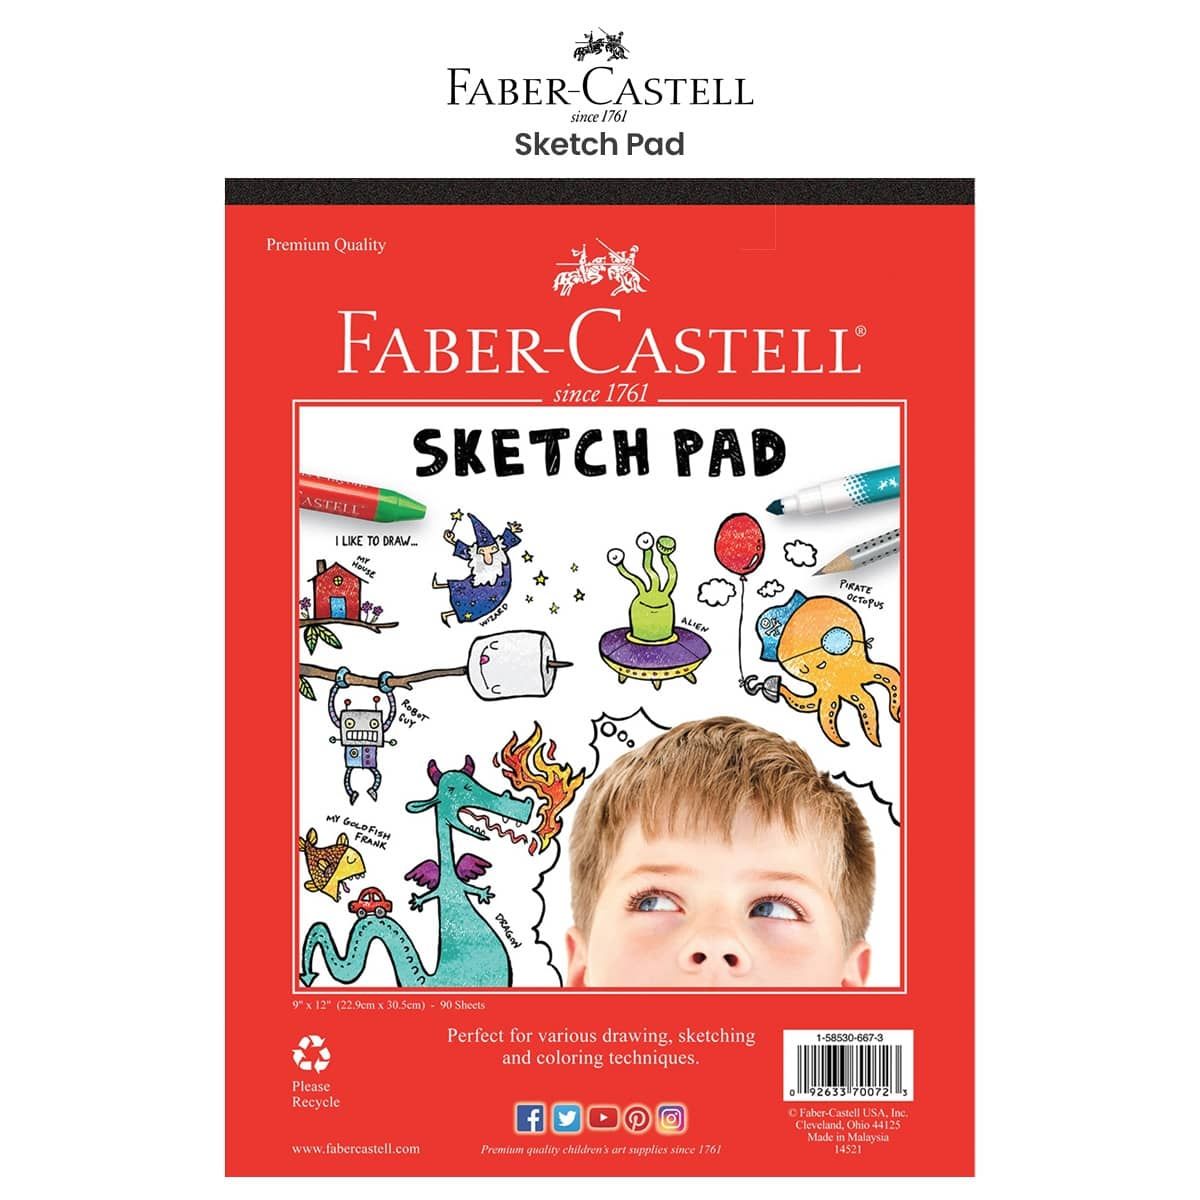 Sketch Pad For Kids: Kids Sketch Book for Drawing Practice (Art Supplies  For Kids age 7-9, 9-12), Art Drawing Book For Kids, 120 Pages / 60 Sheets